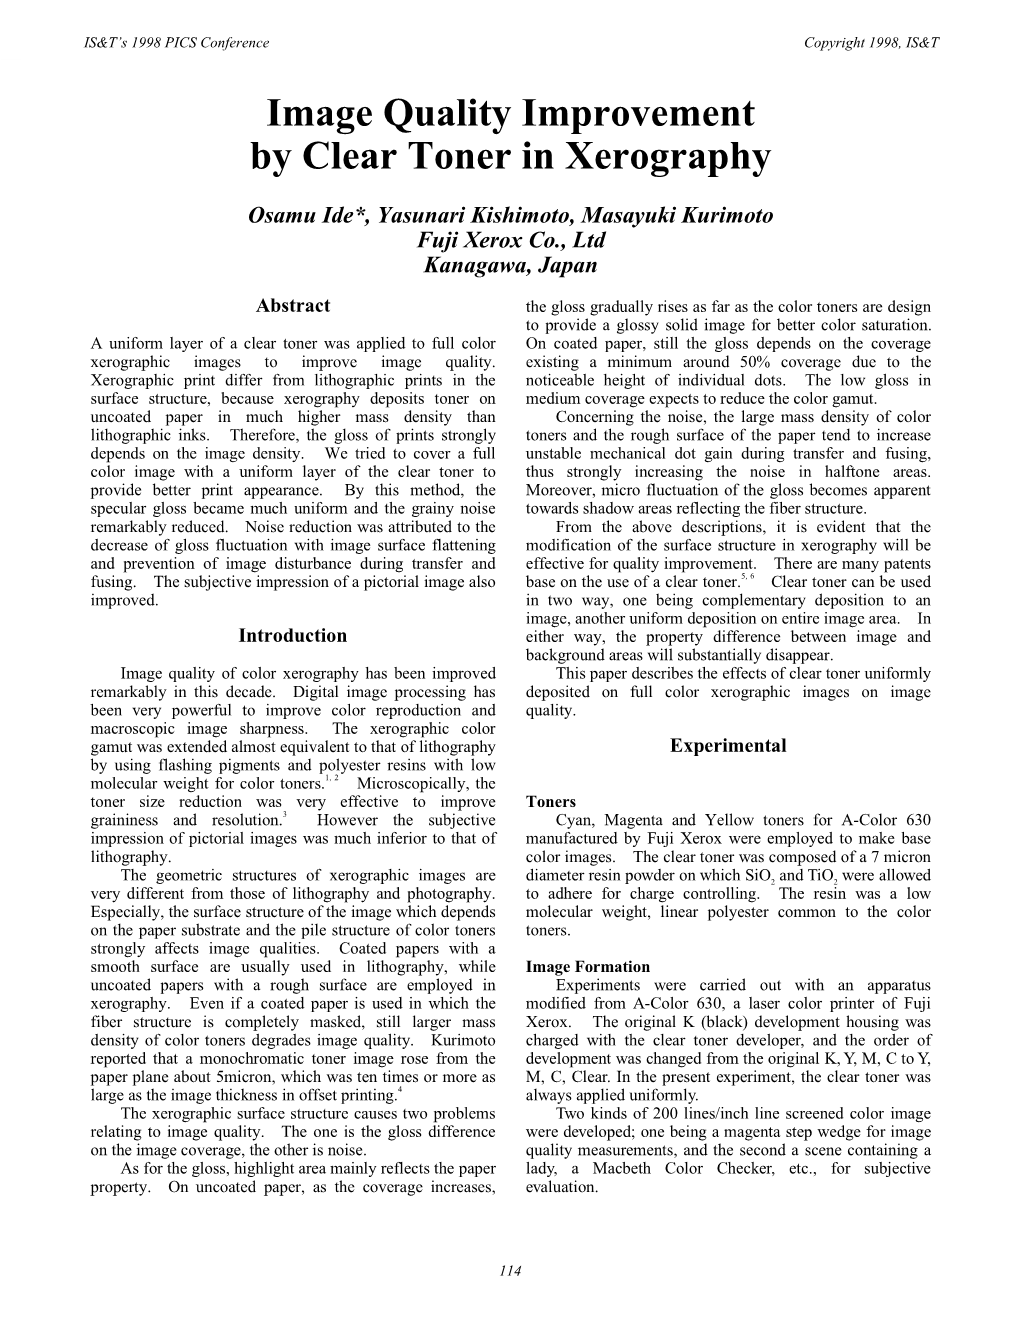 Image Quality Improvement by Clear Toner in Xerography